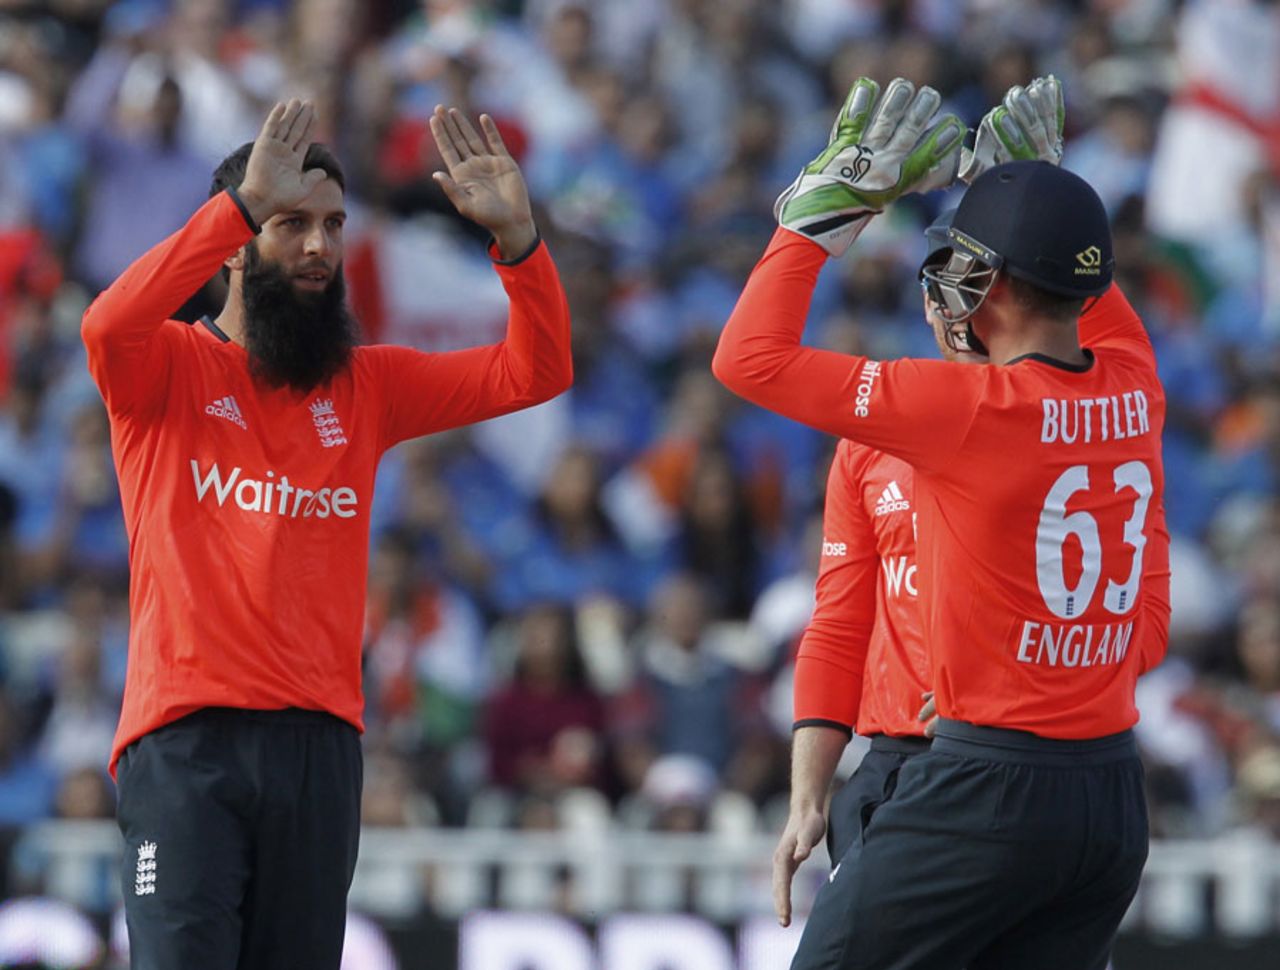 Moeen Ali picked up a wicket in his opening over, England v India, only T20, Edgbaston, September 7, 2014